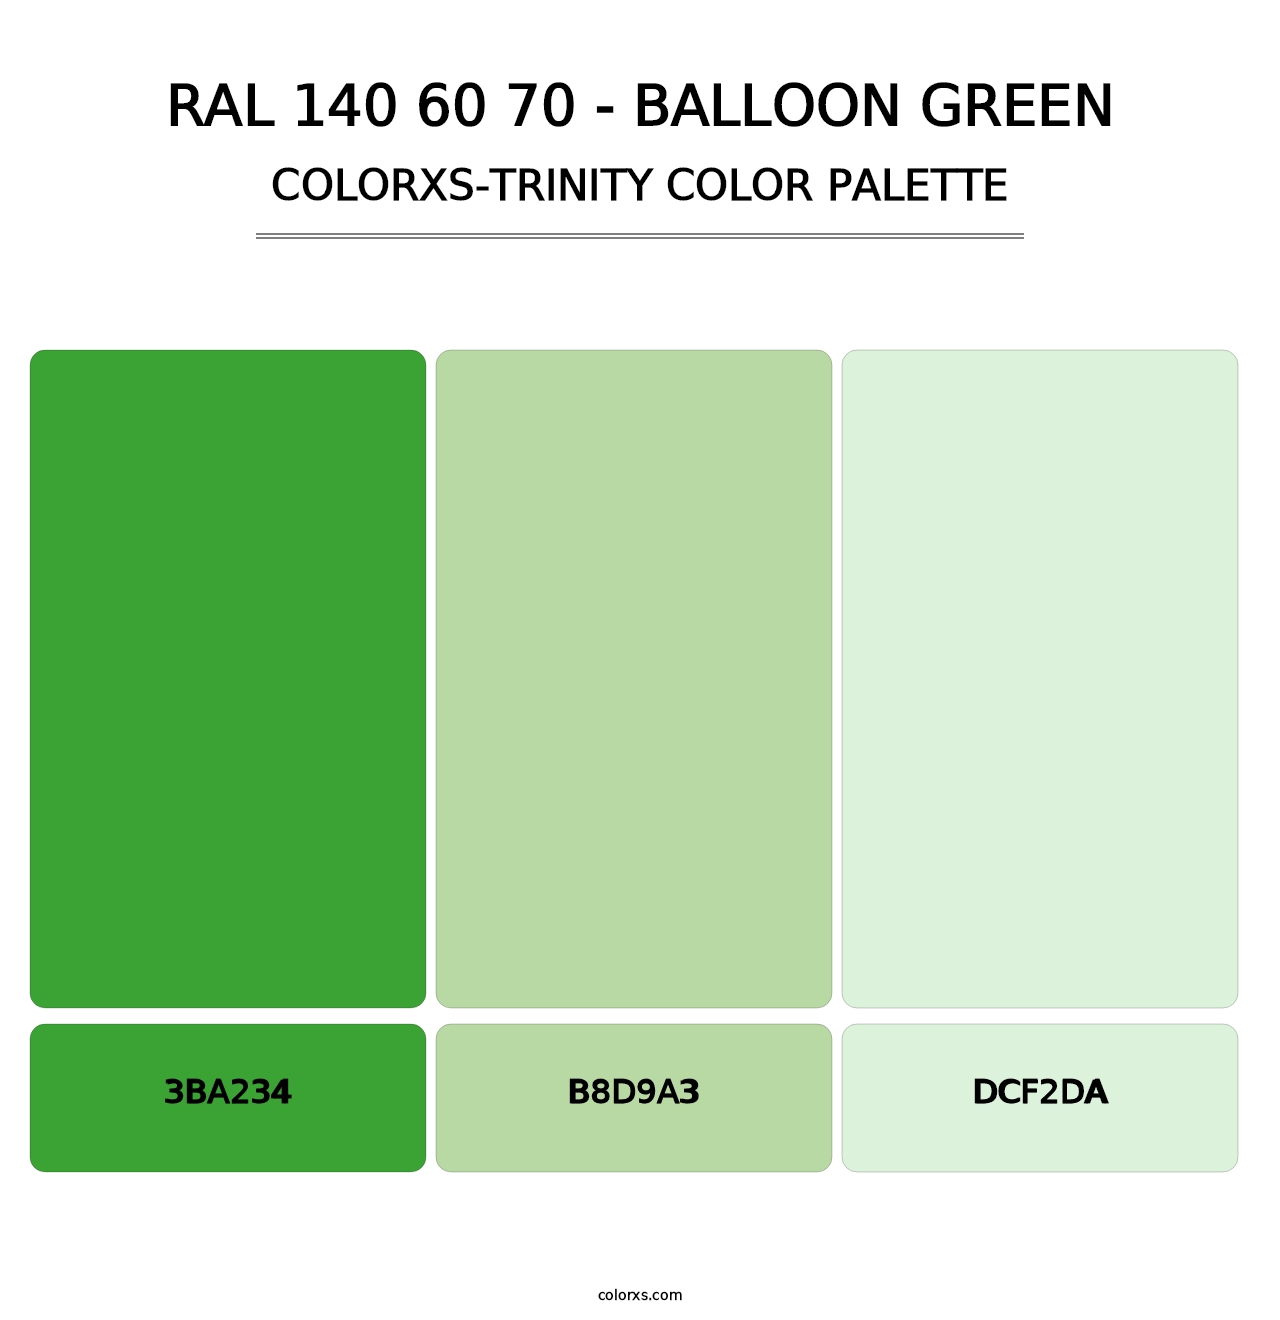 RAL 140 60 70 - Balloon Green - Colorxs Trinity Palette